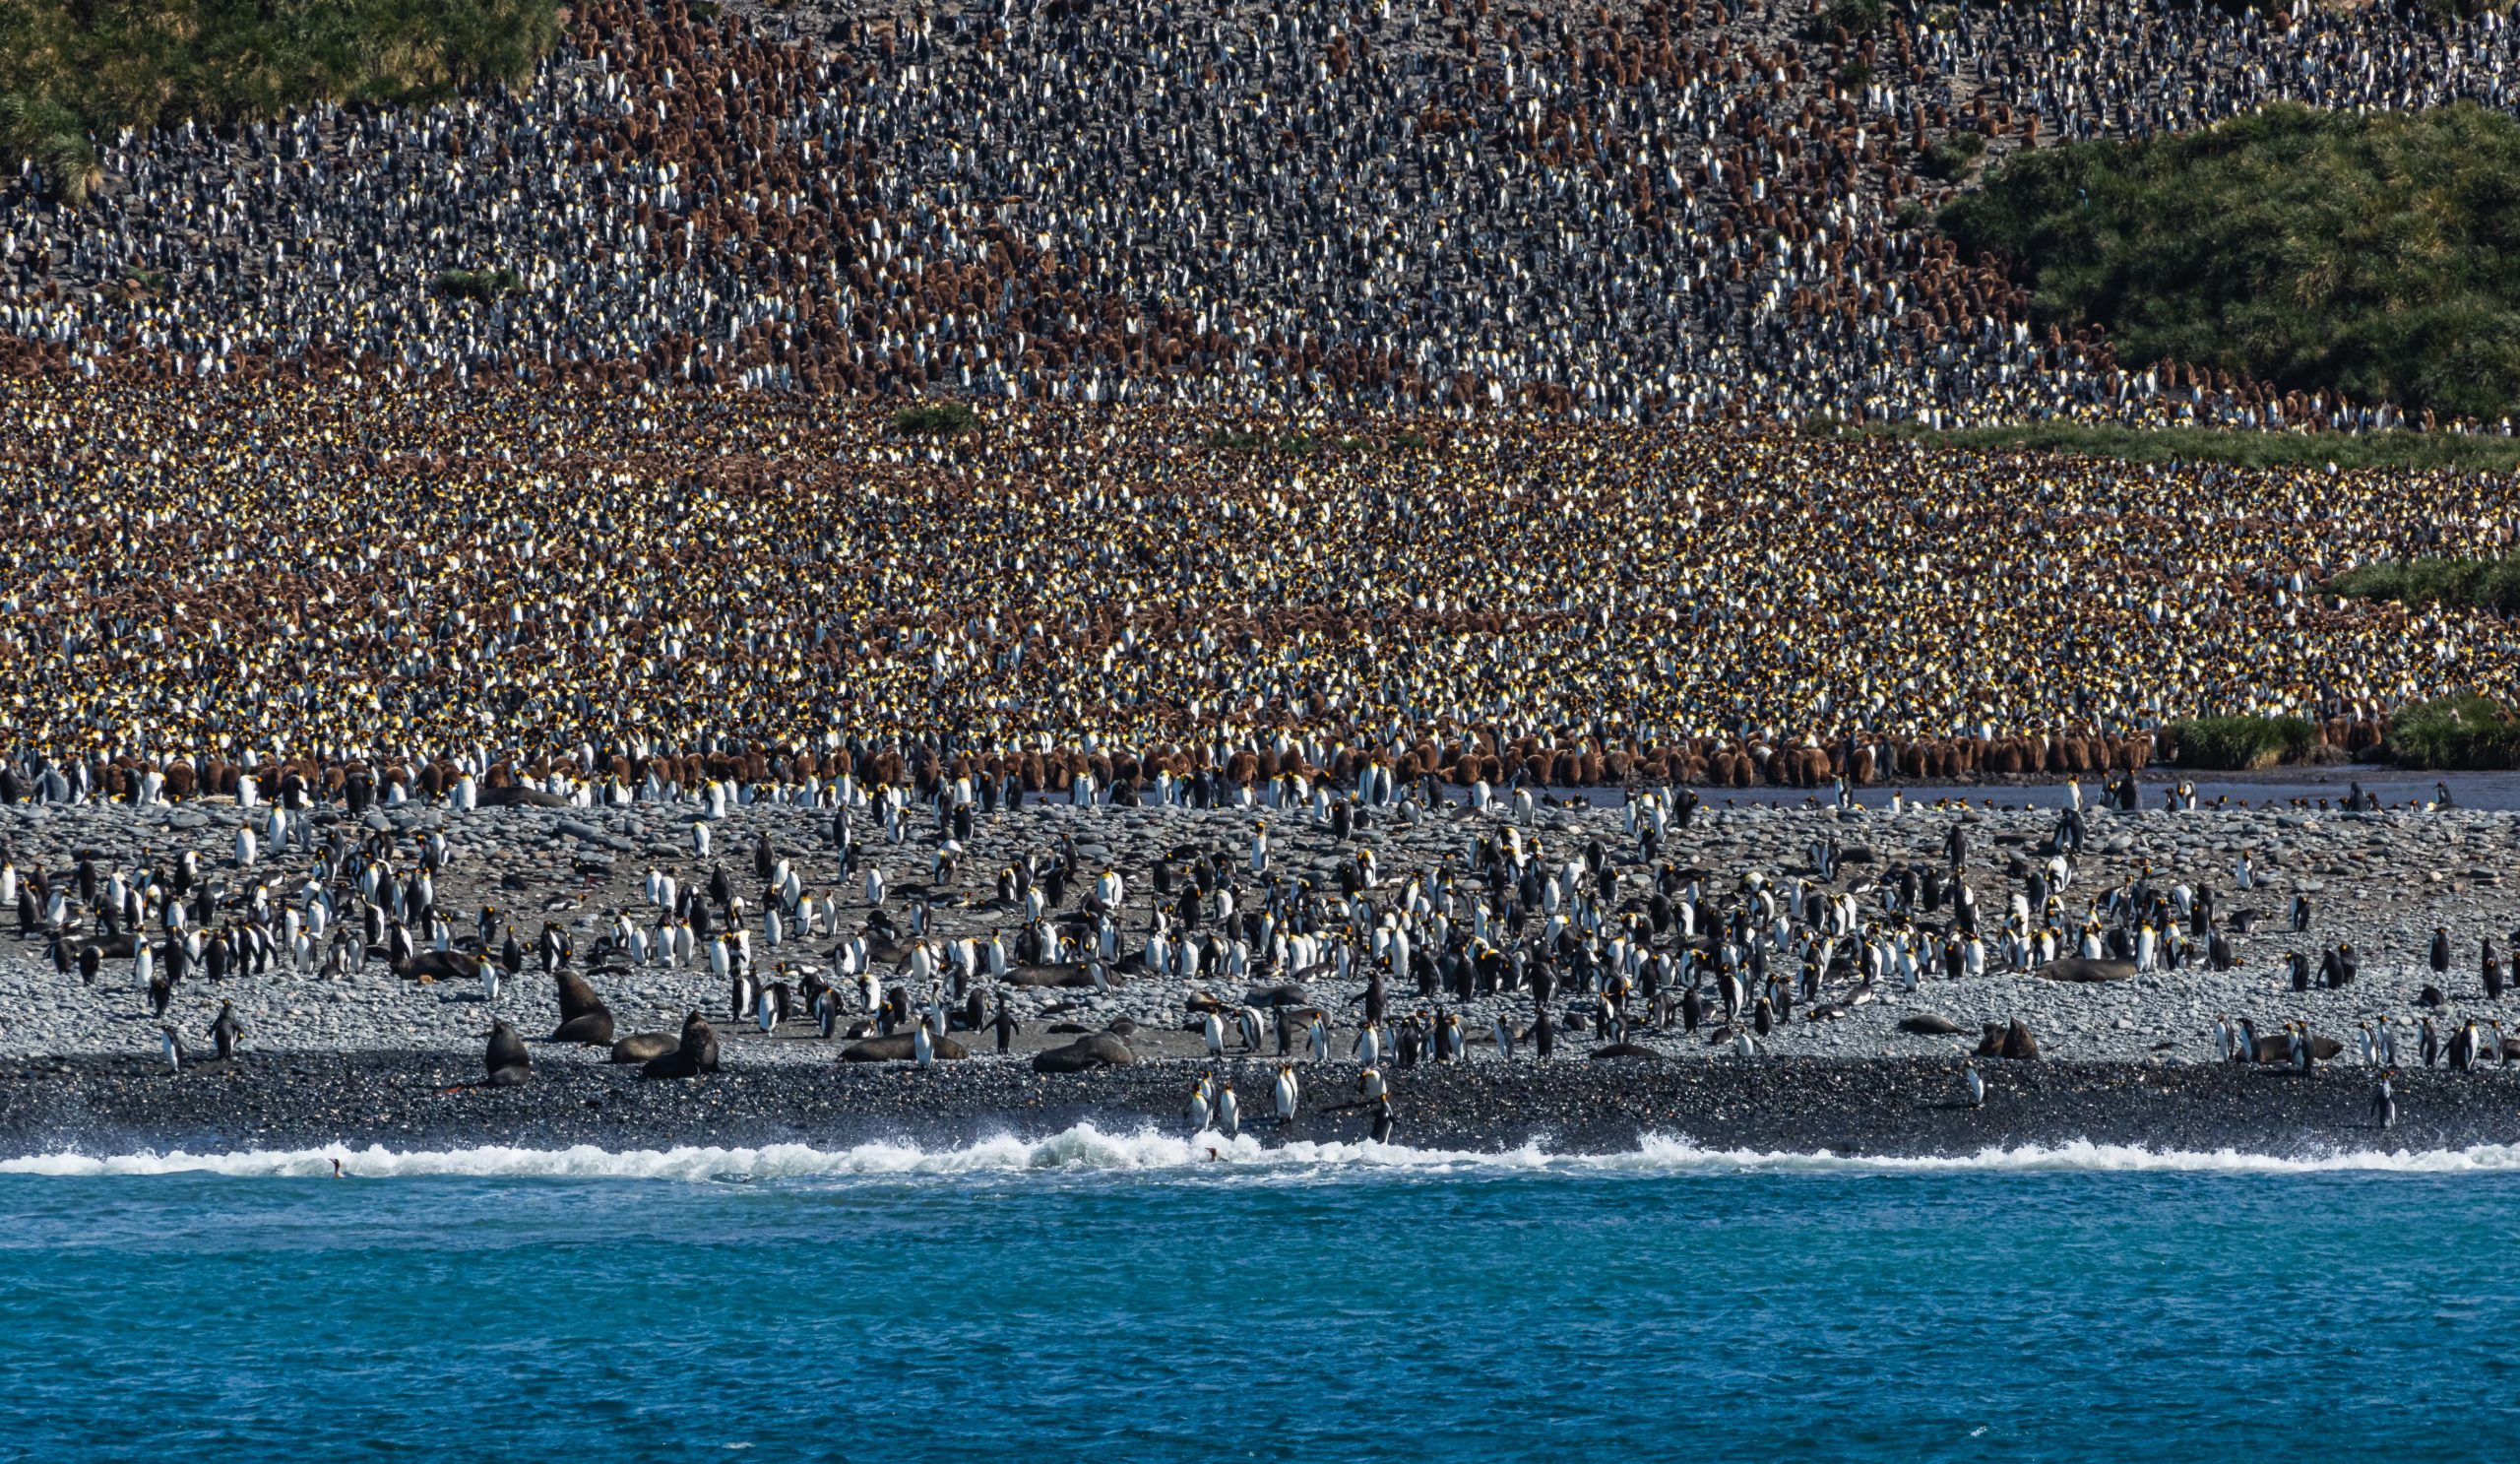 A large King Penguin Colony on the beaches of South Georgia Island